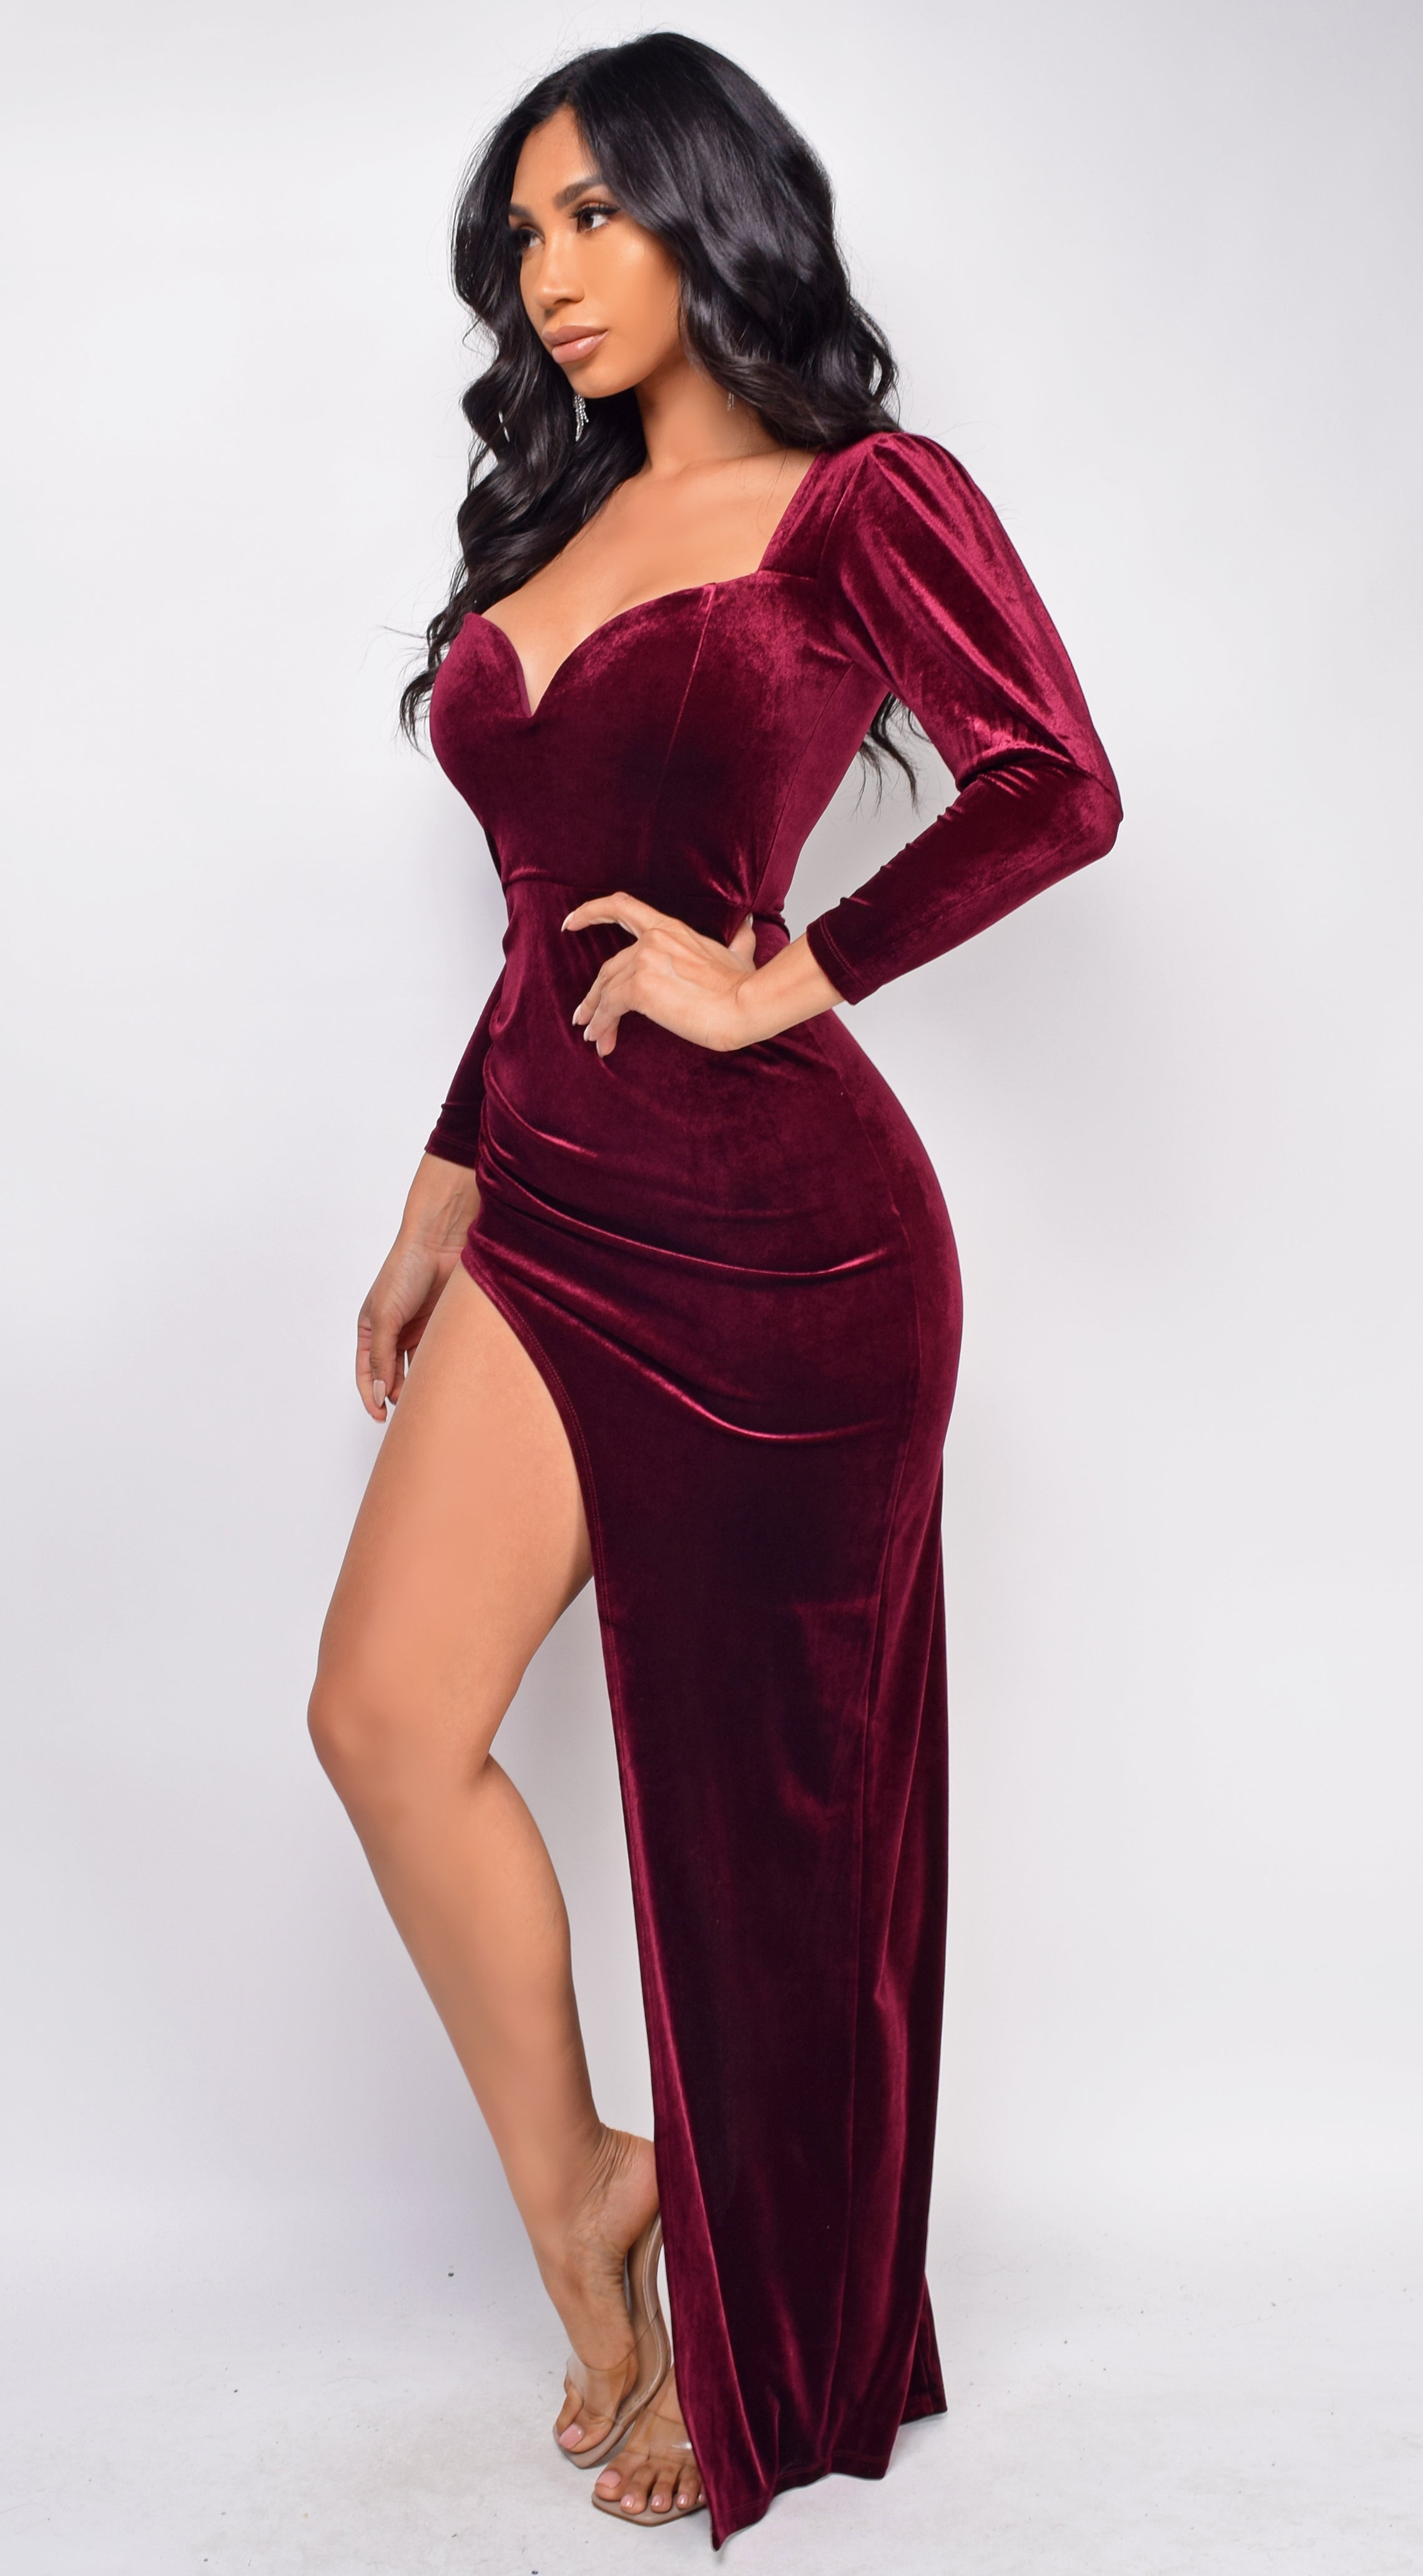 deep cherry red velvet gown | Fashion, Beautiful dresses, Gowns